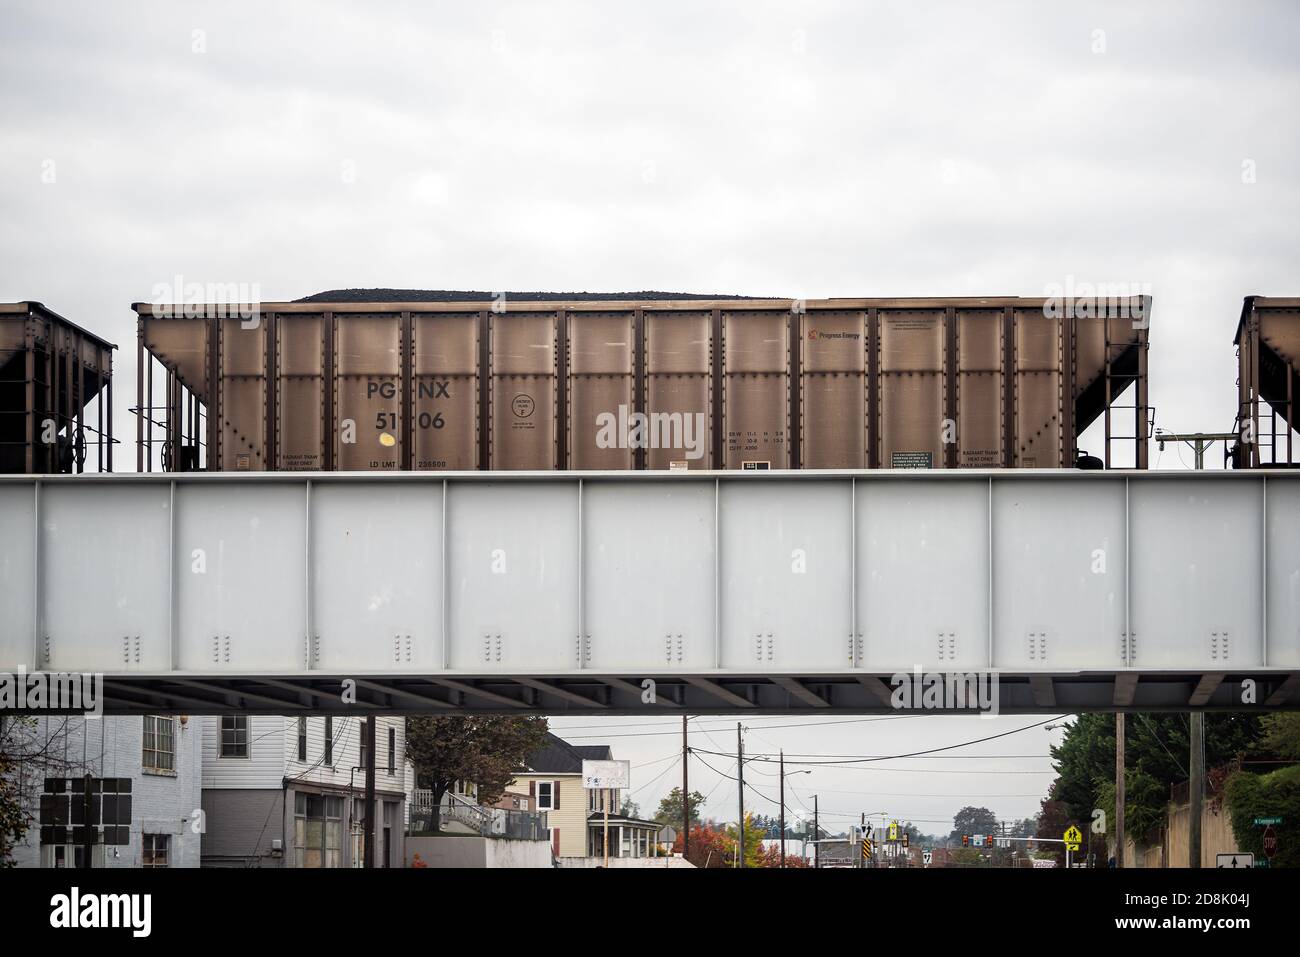 Waynesboro, USA - October 27, 2020: Industrial railcars freight car on bridge in small Virginia town city with coal filled train transportation Stock Photo